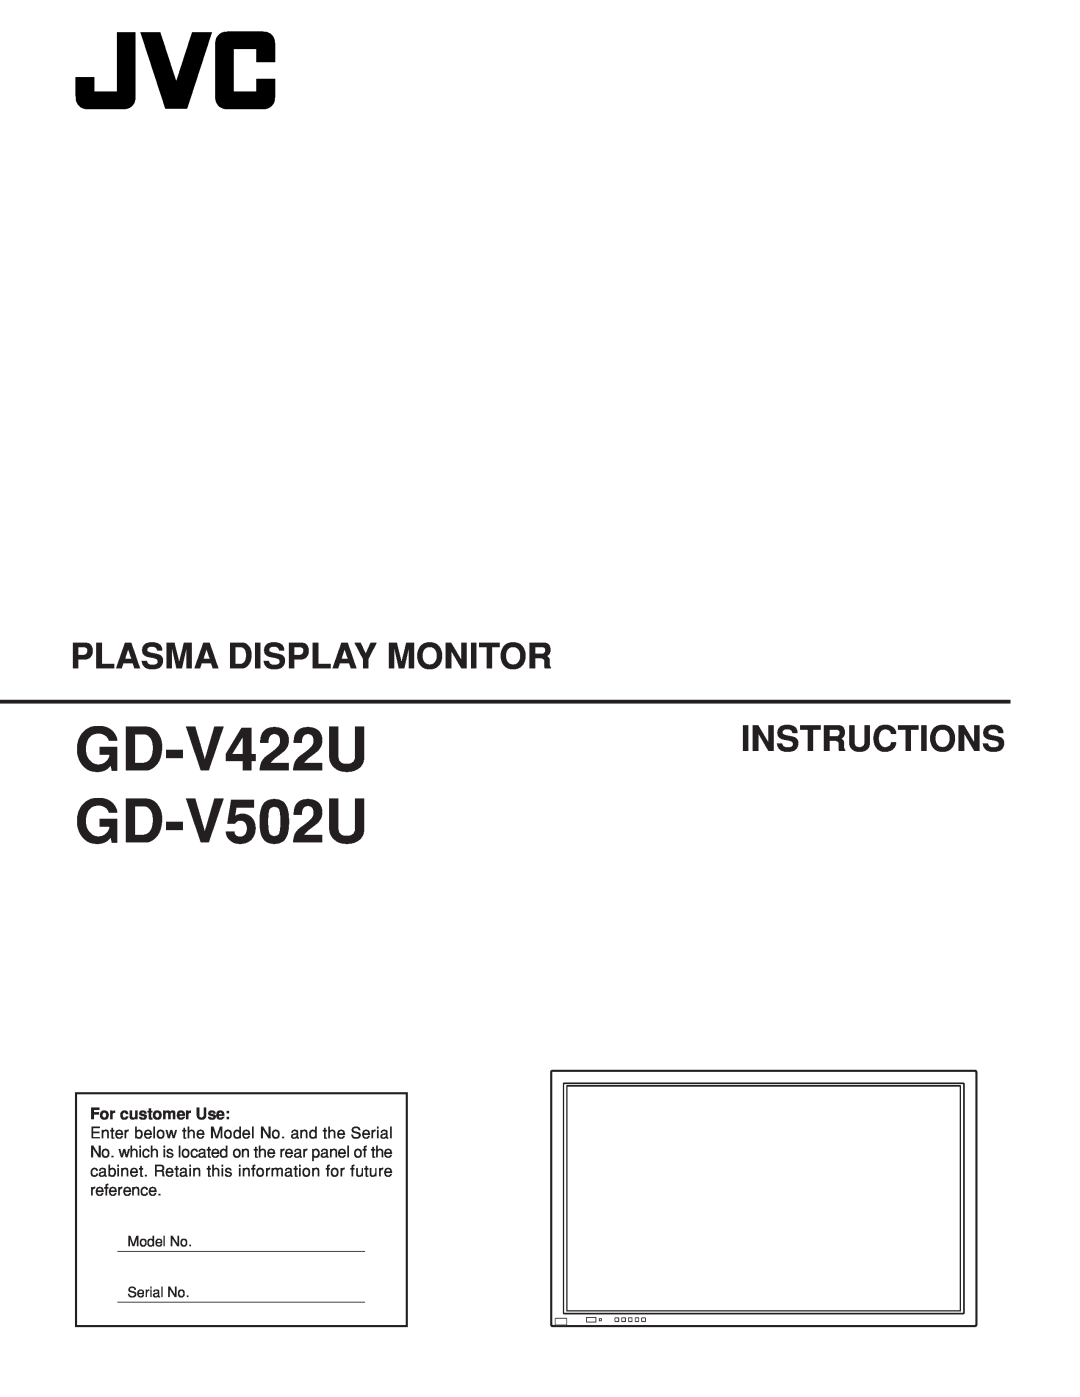 JVC GD V502U manual GD-V422U GD-V502U, Plasma Display Monitor, Instructions, For customer Use 